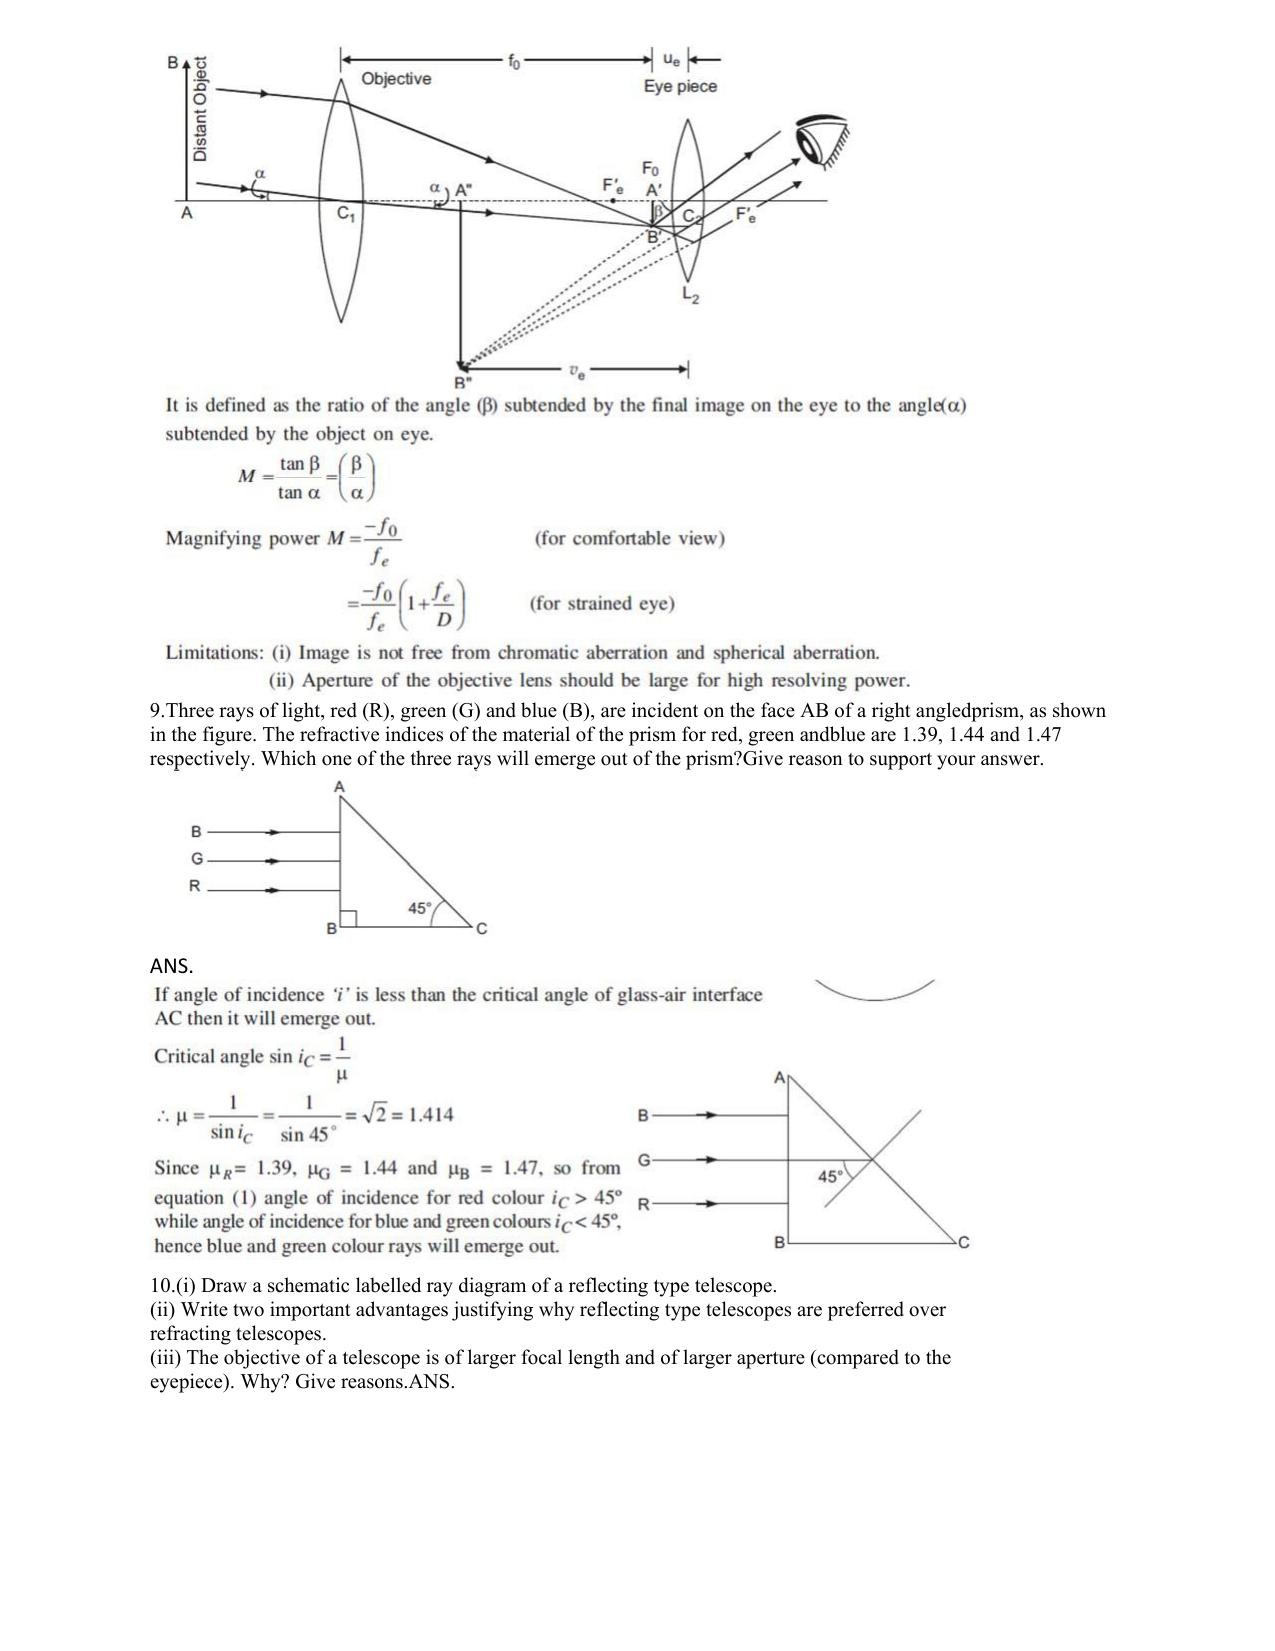 CBSE Class 12 Physics Worksheets for Optics - Page 8